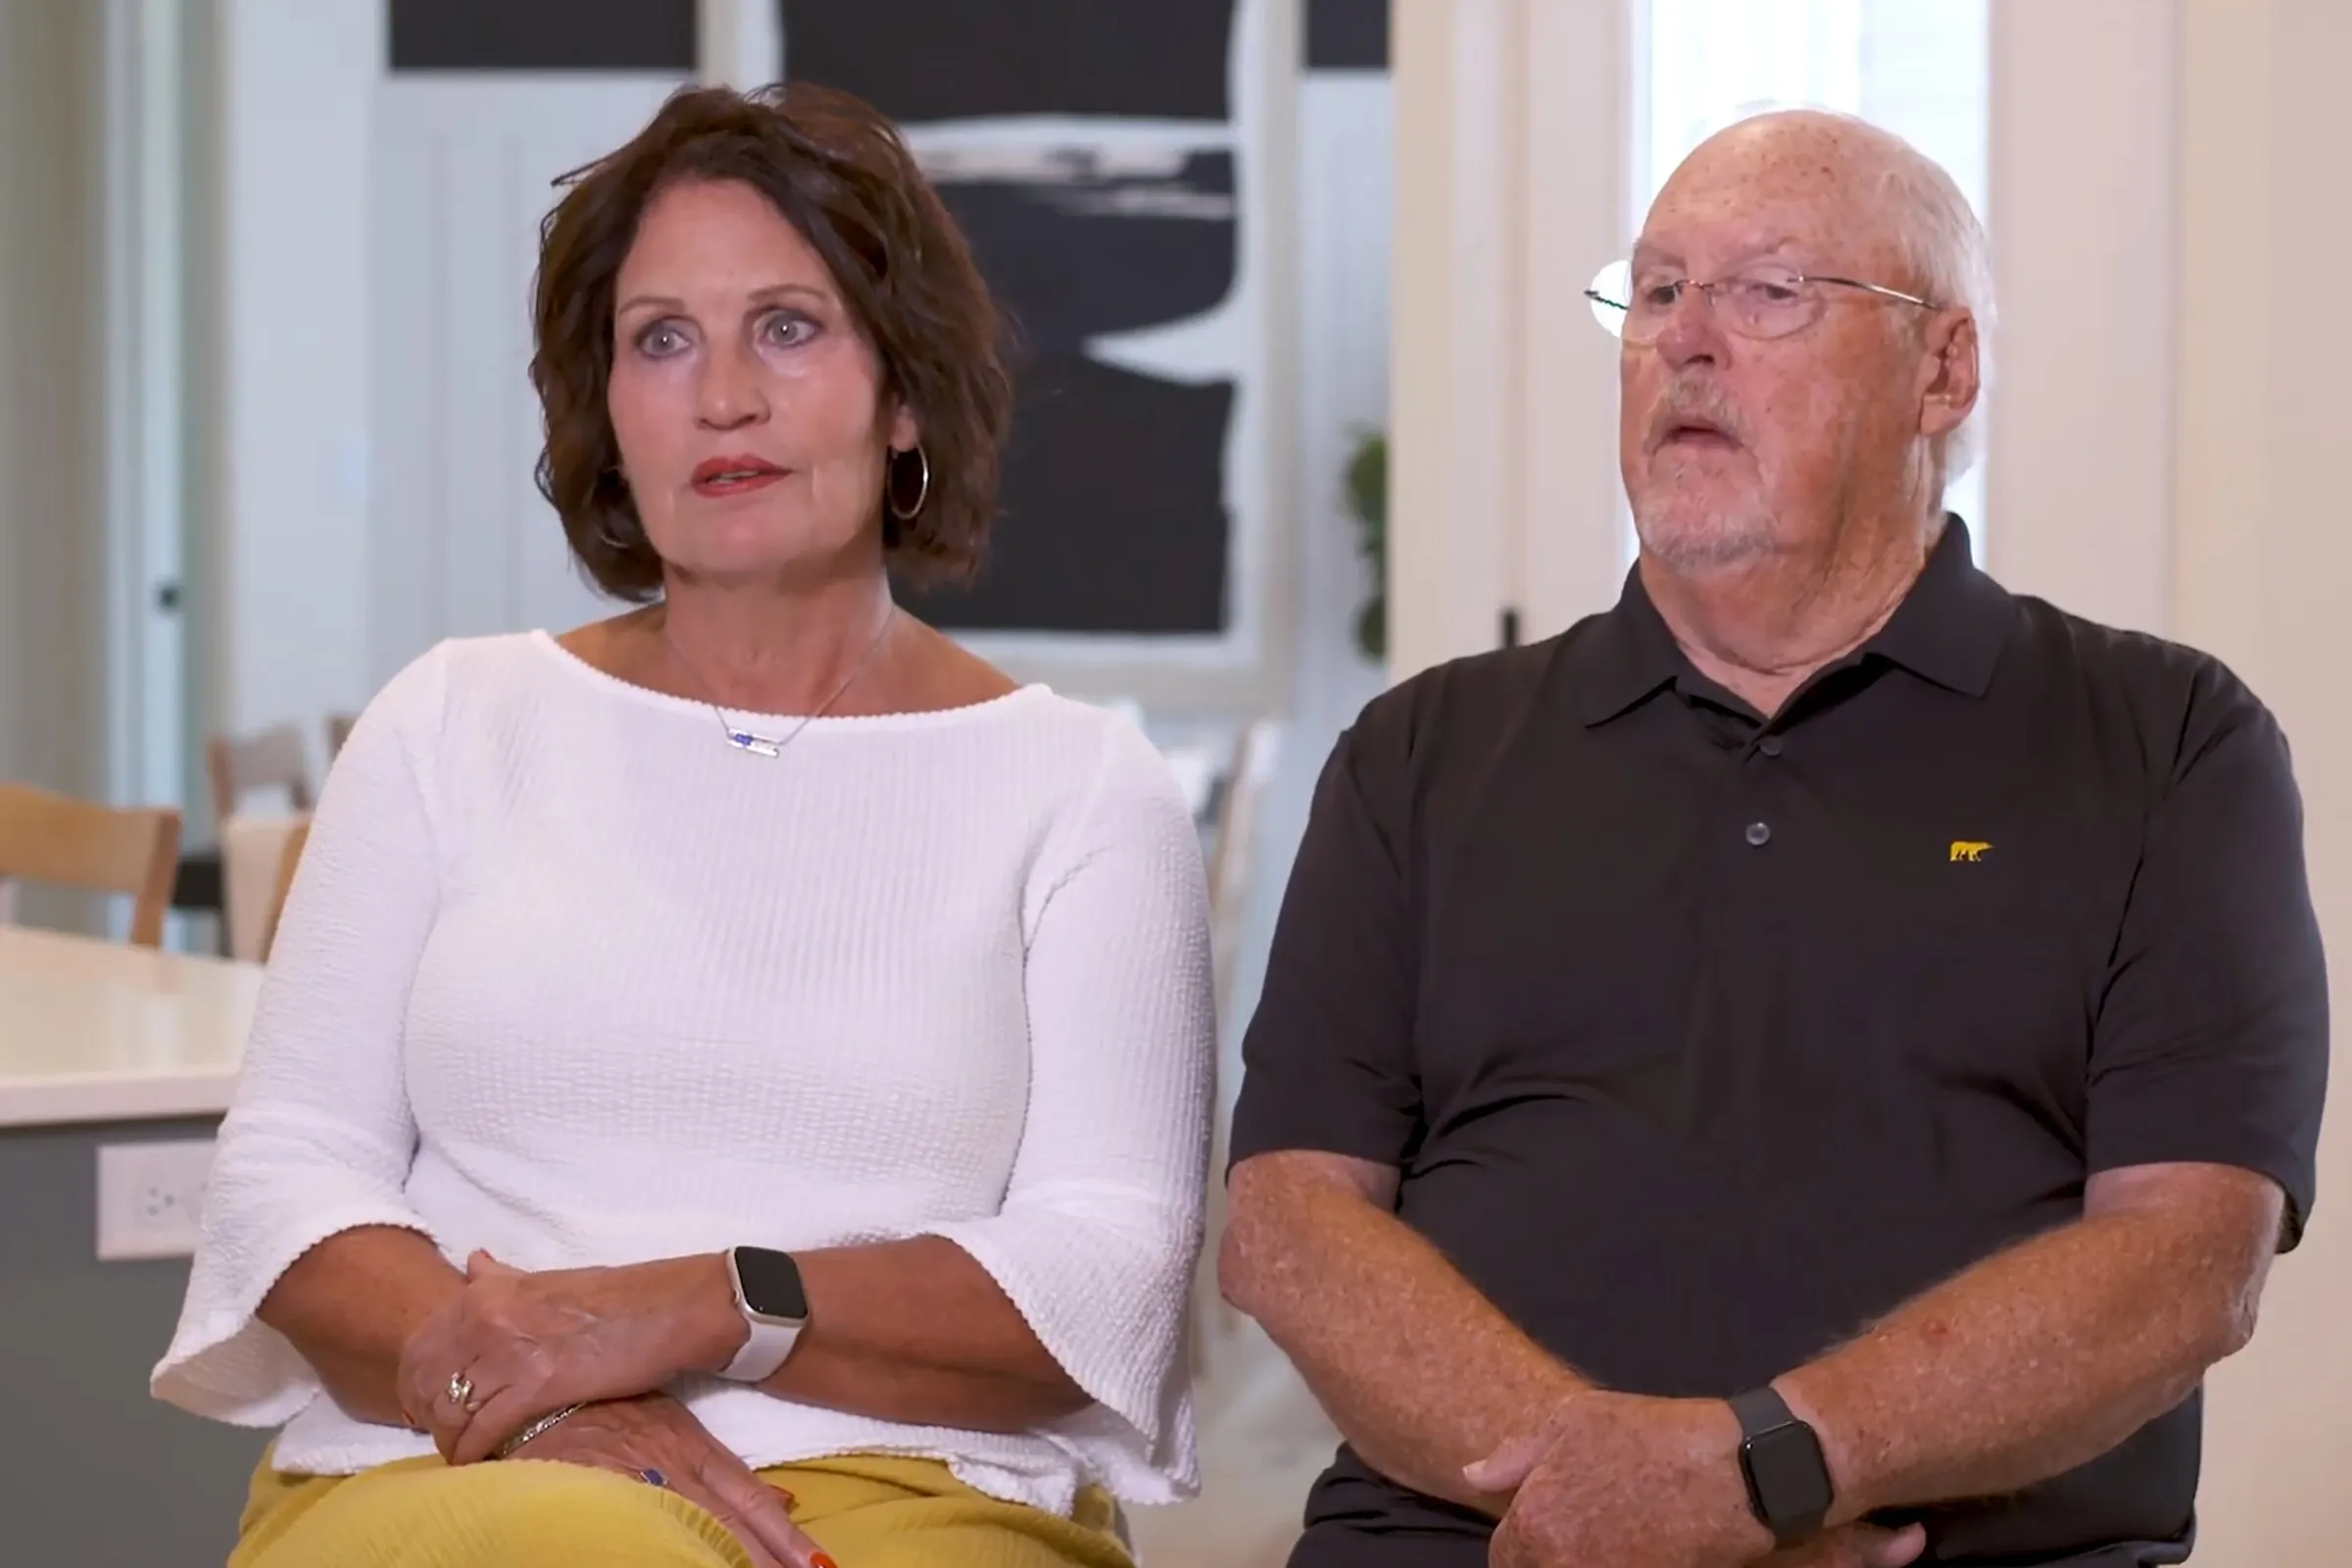 Don and Lori Love Their New Home and Sense of Community